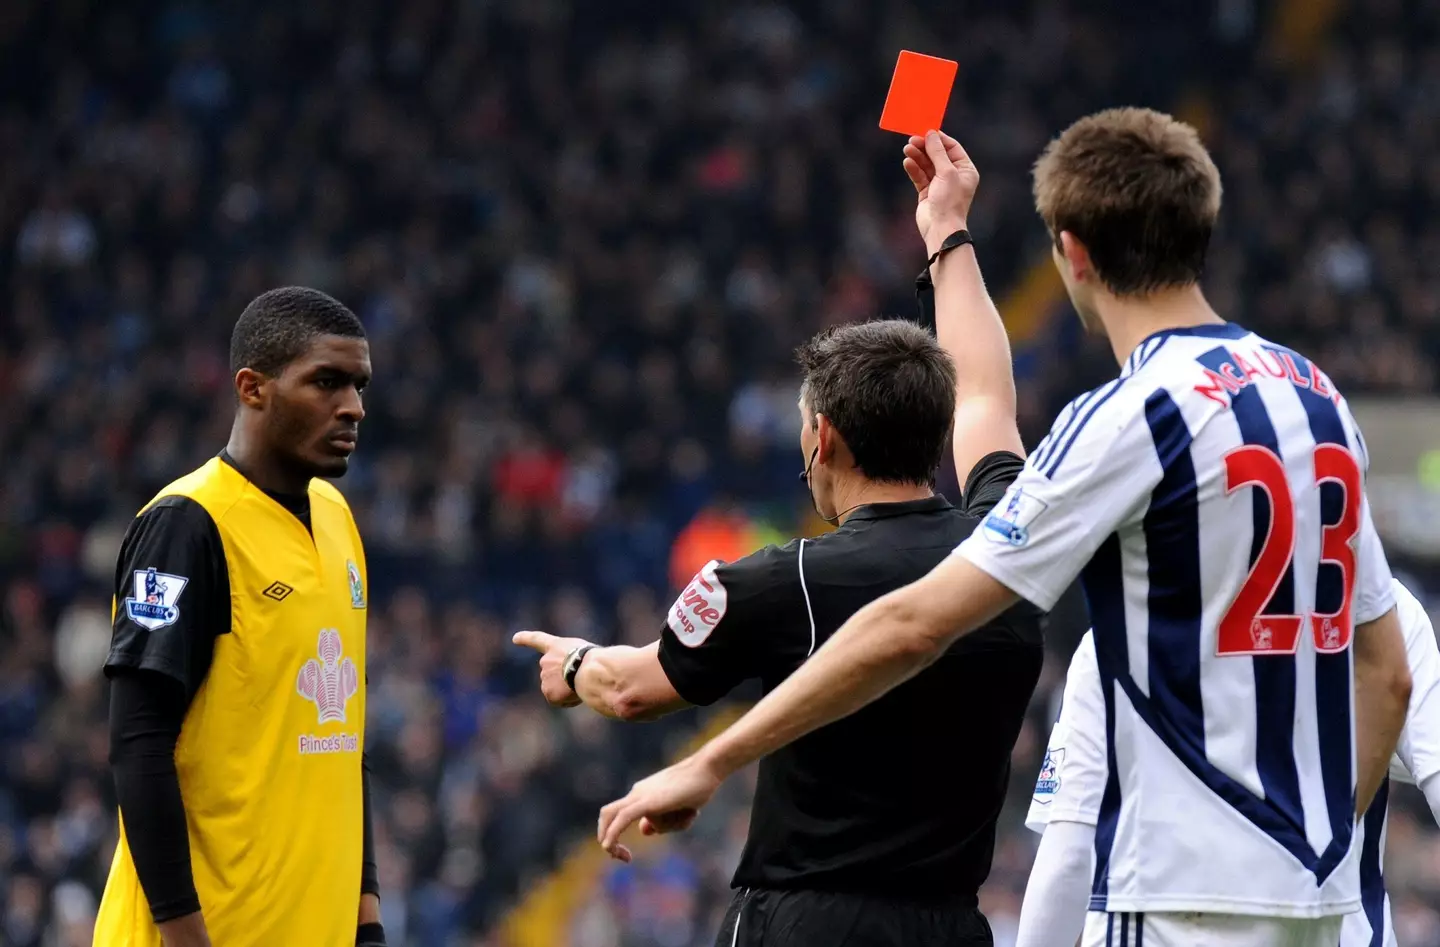 Modeste is sent off after kicking out at Billy Jones. (Image